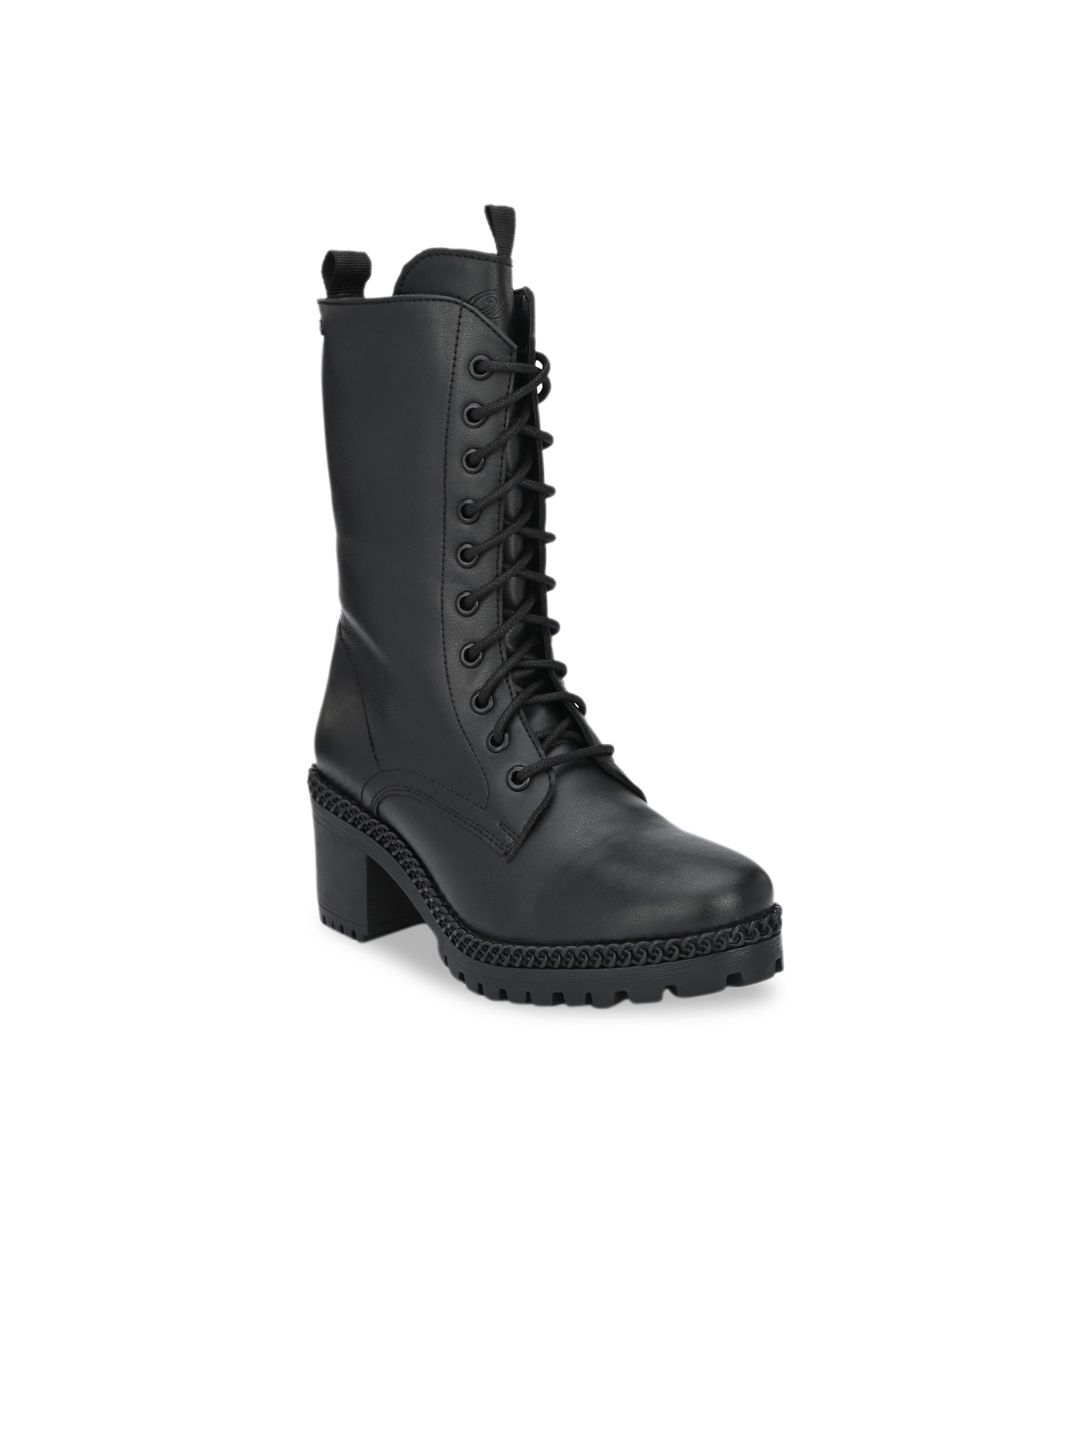 Delize Black High-Top Block Heeled Boots Price in India